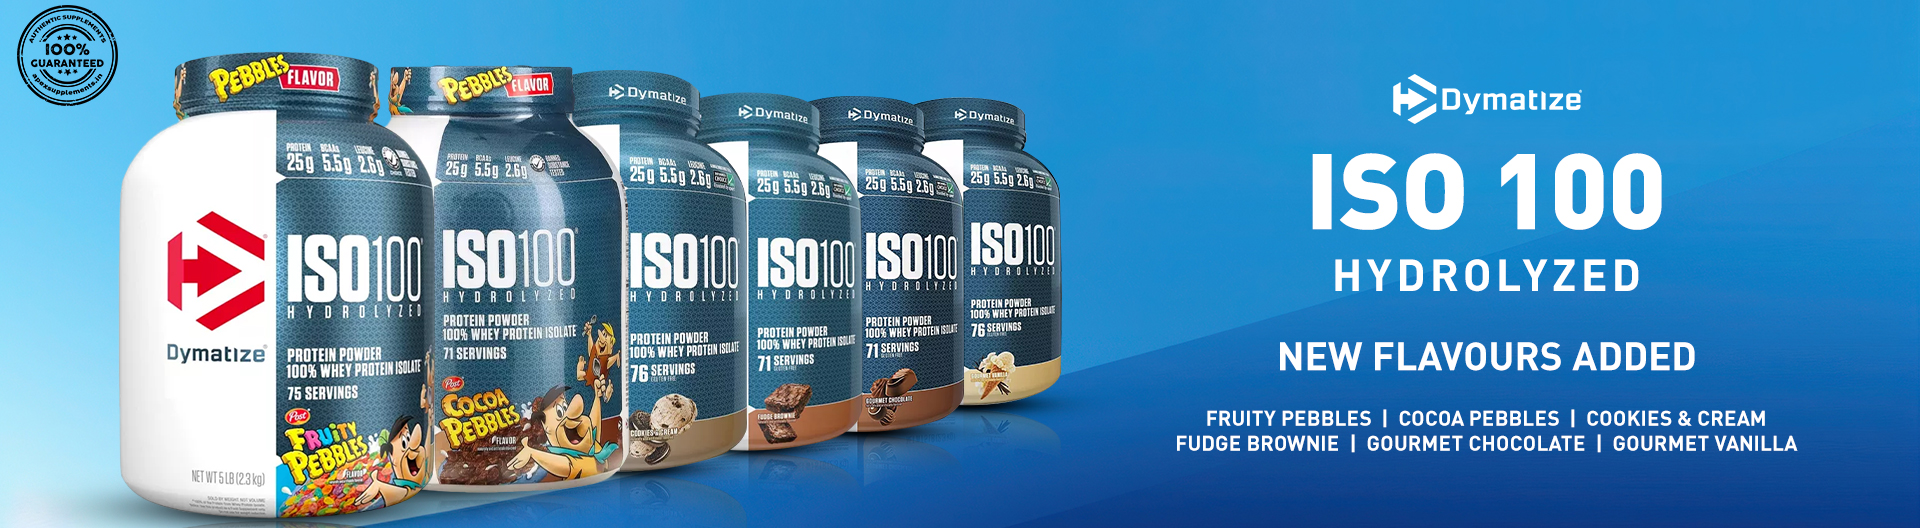 Dymatize ISO100 flavours banner